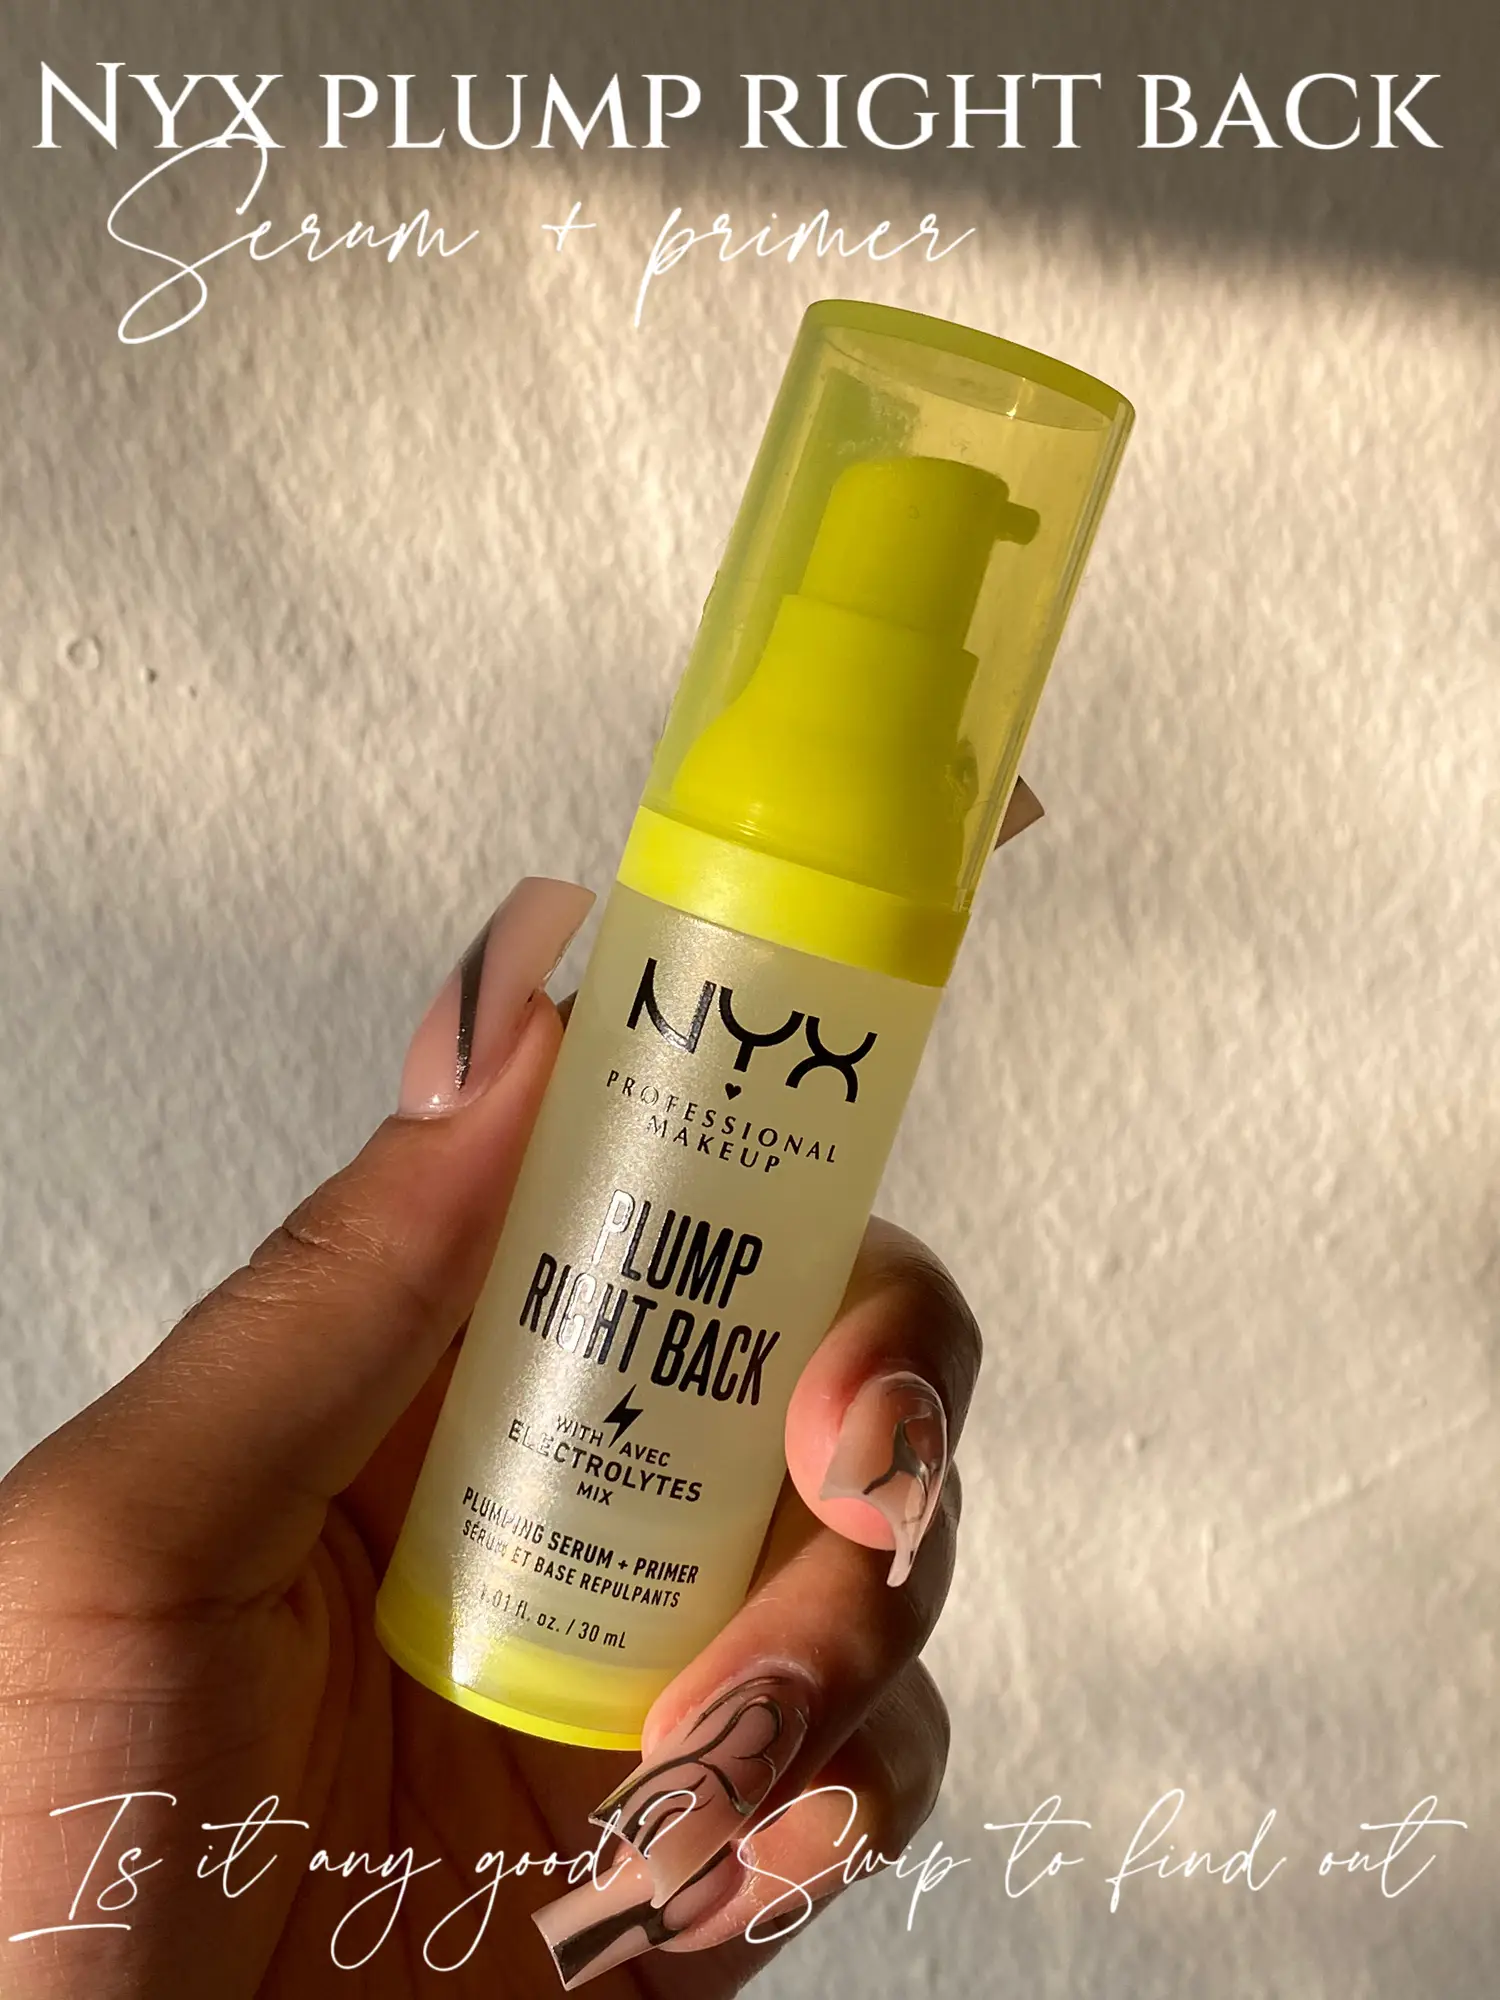 Nyx primer | by posted review plumping Kenyasterling Gallery Lemon8 |